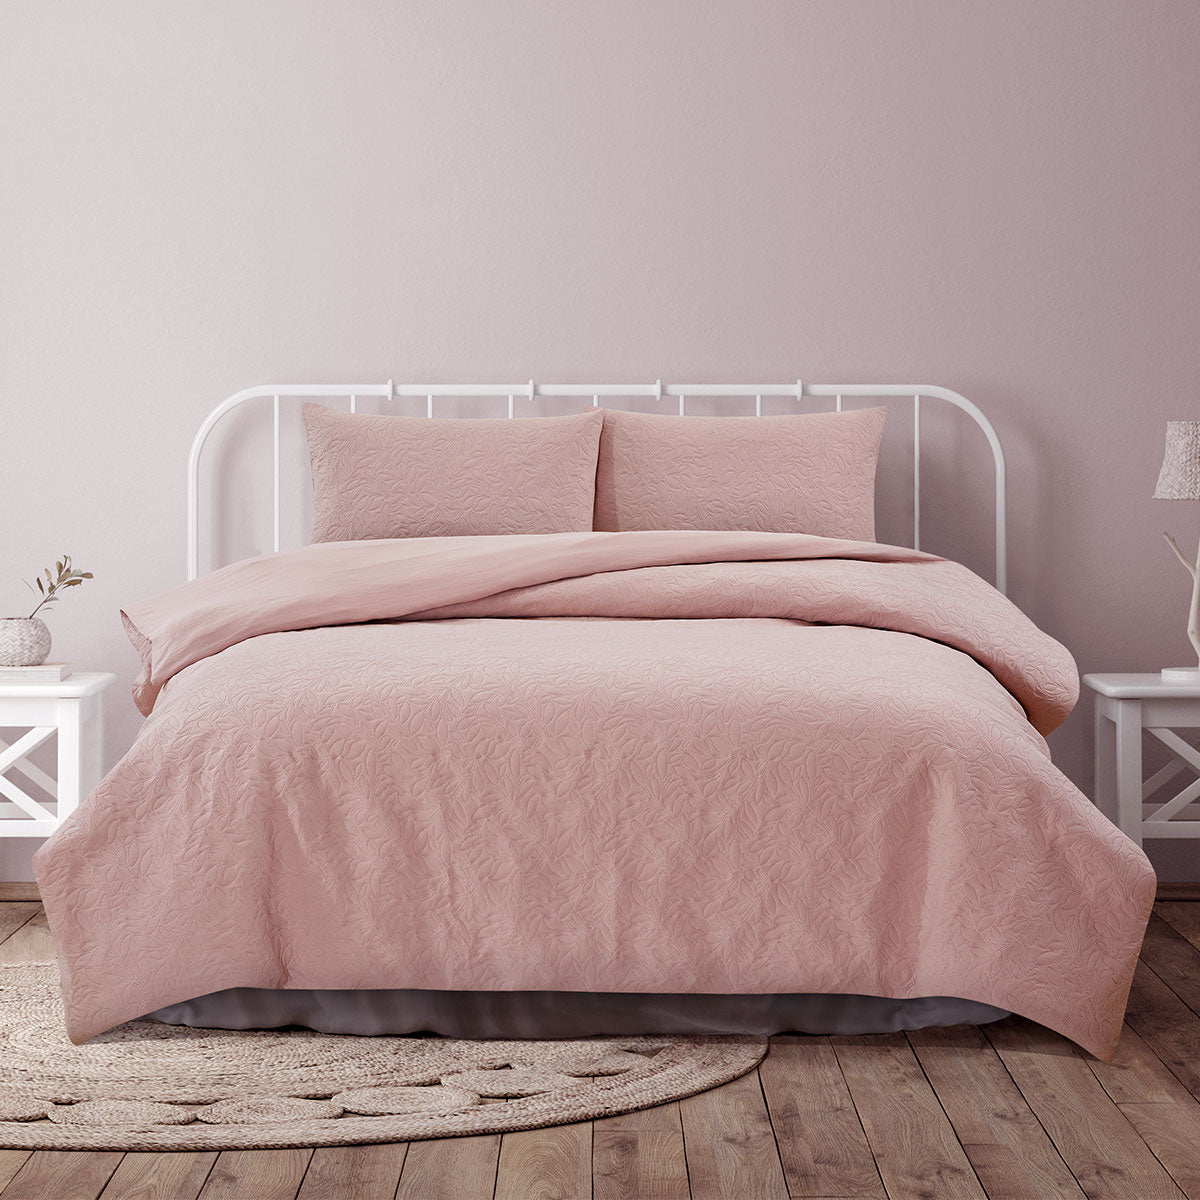 QUEEN Pinsonic Embossed Quilt Cover Set - Blush